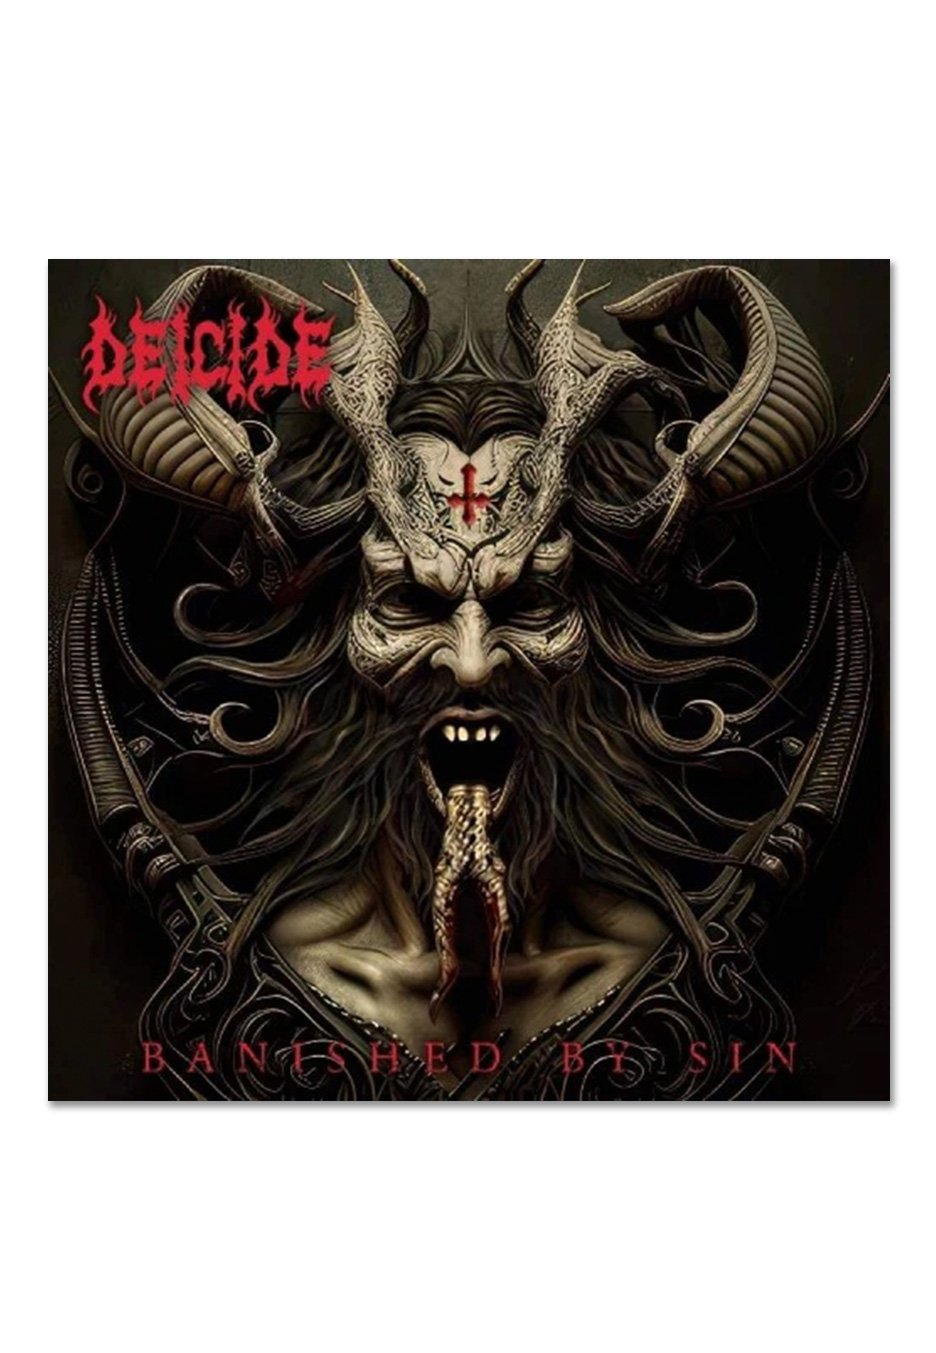 Deicide - Banished By Sin - CD